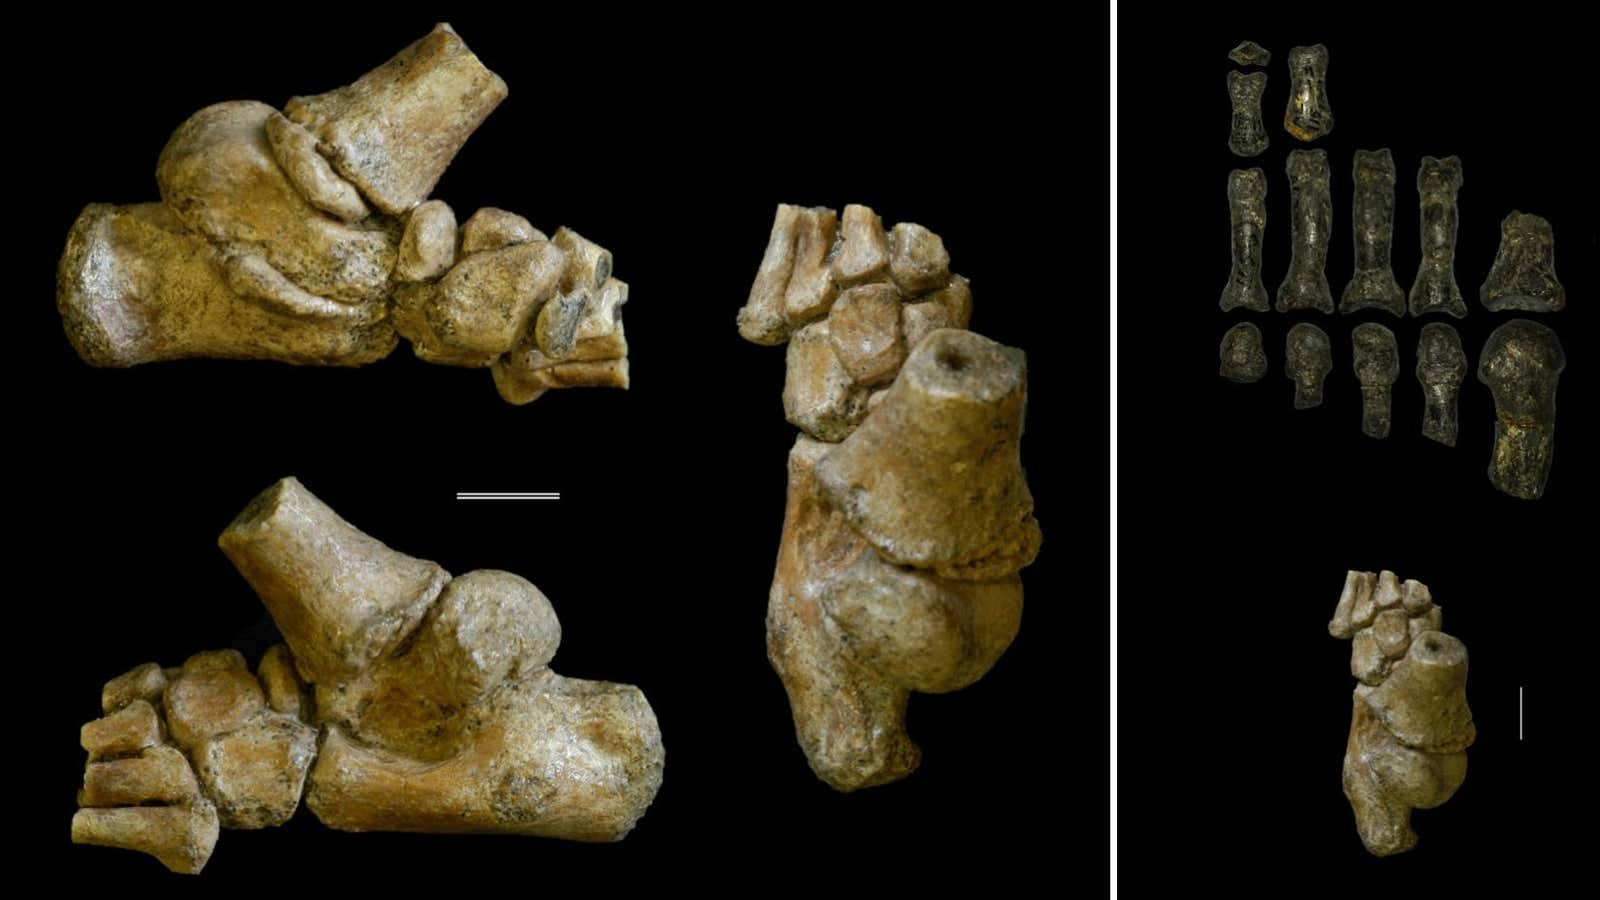 The 3.32 million year old foot of an Australopithecus afarensis toddler shown in different angles.